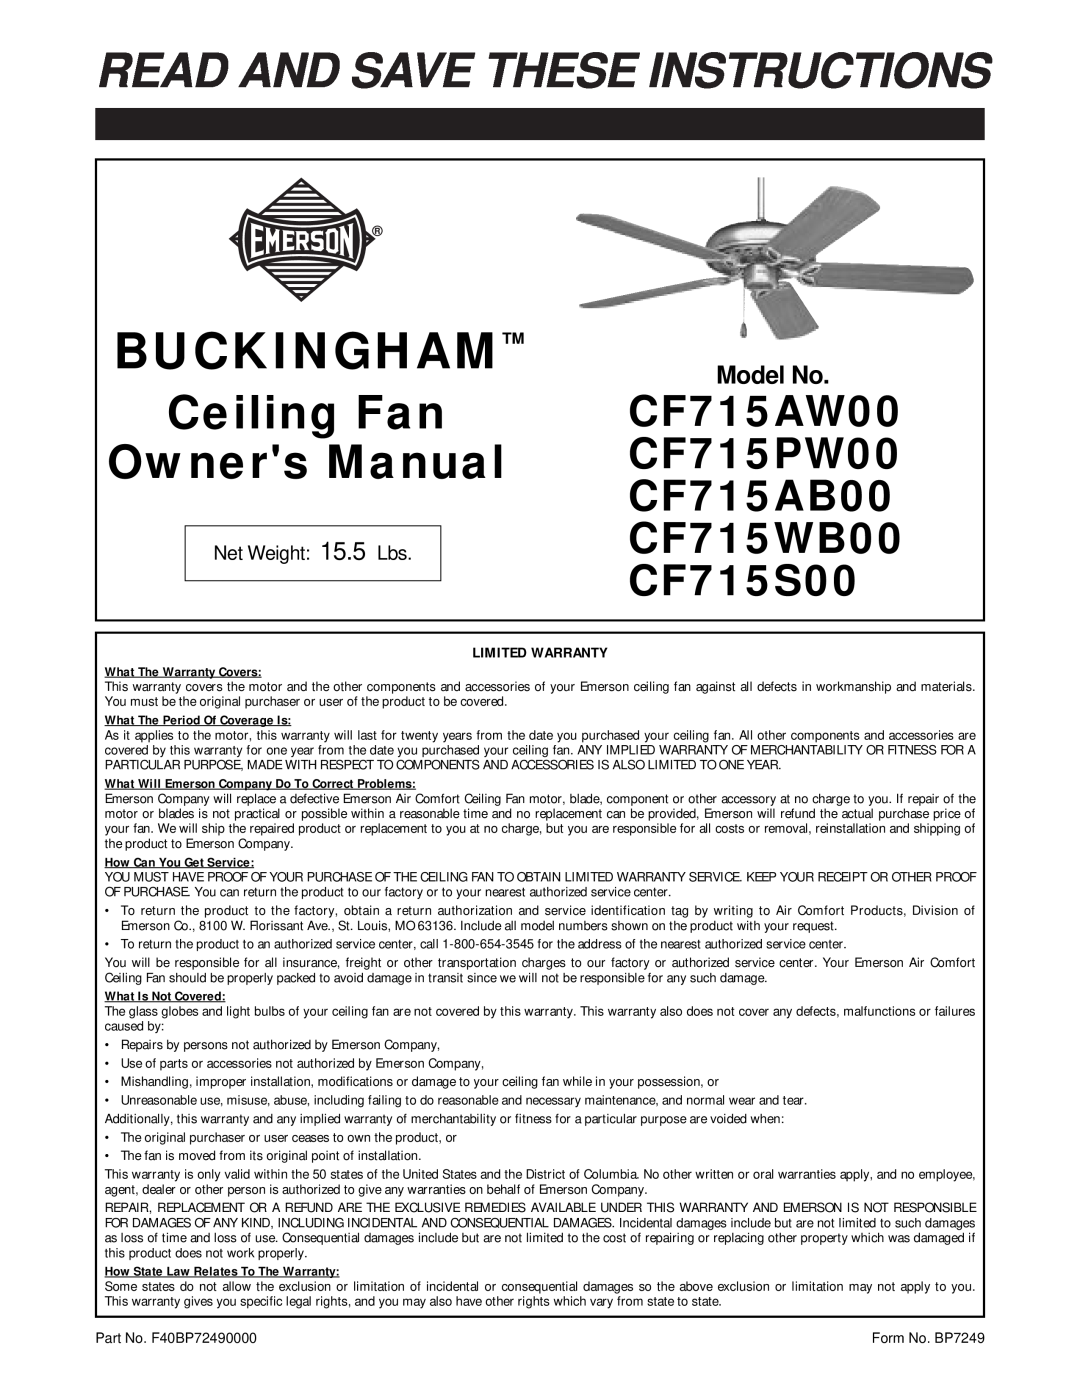 Emerson CF715S00 warranty Model No, Buckingham, Read And Save These Instructions, Ceiling Fan, CF715AW00, CF715PW00 